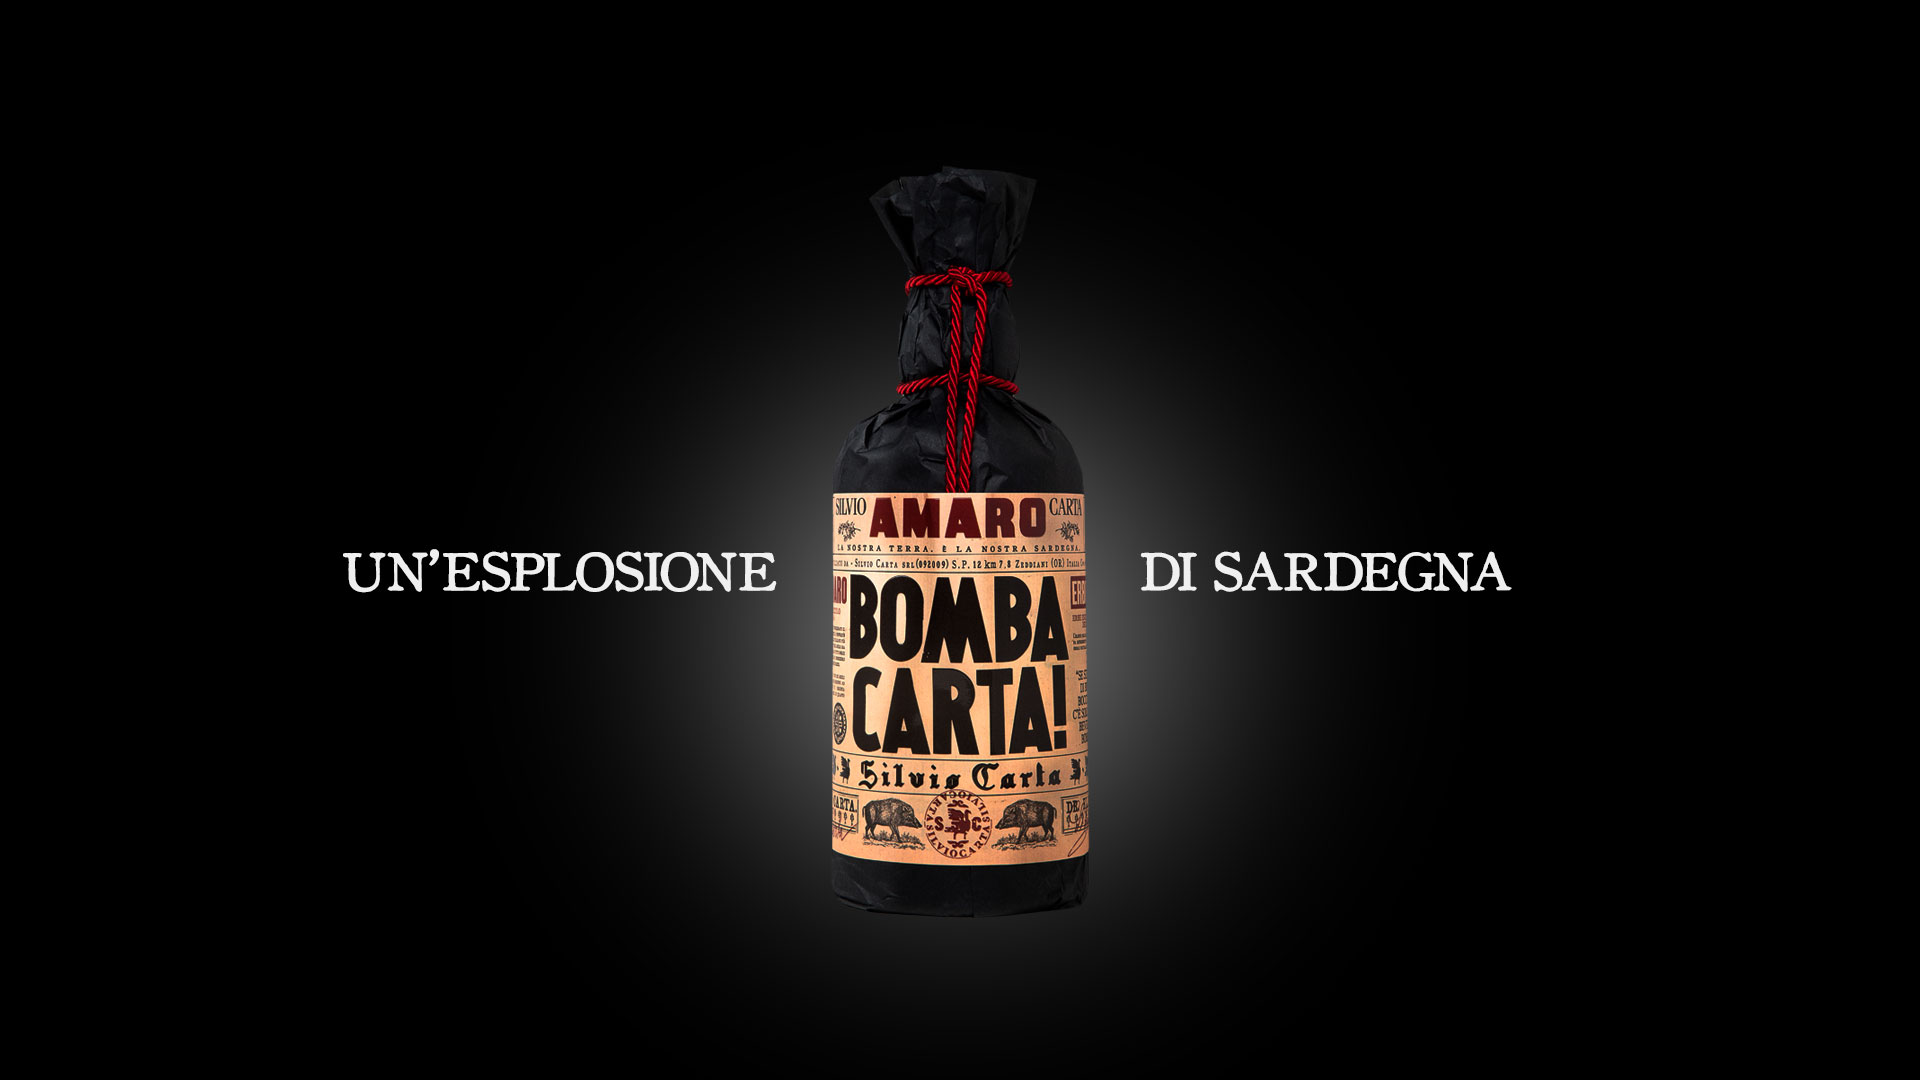 Amaro Bomba Carta starring in a new TV commercial and social campaign